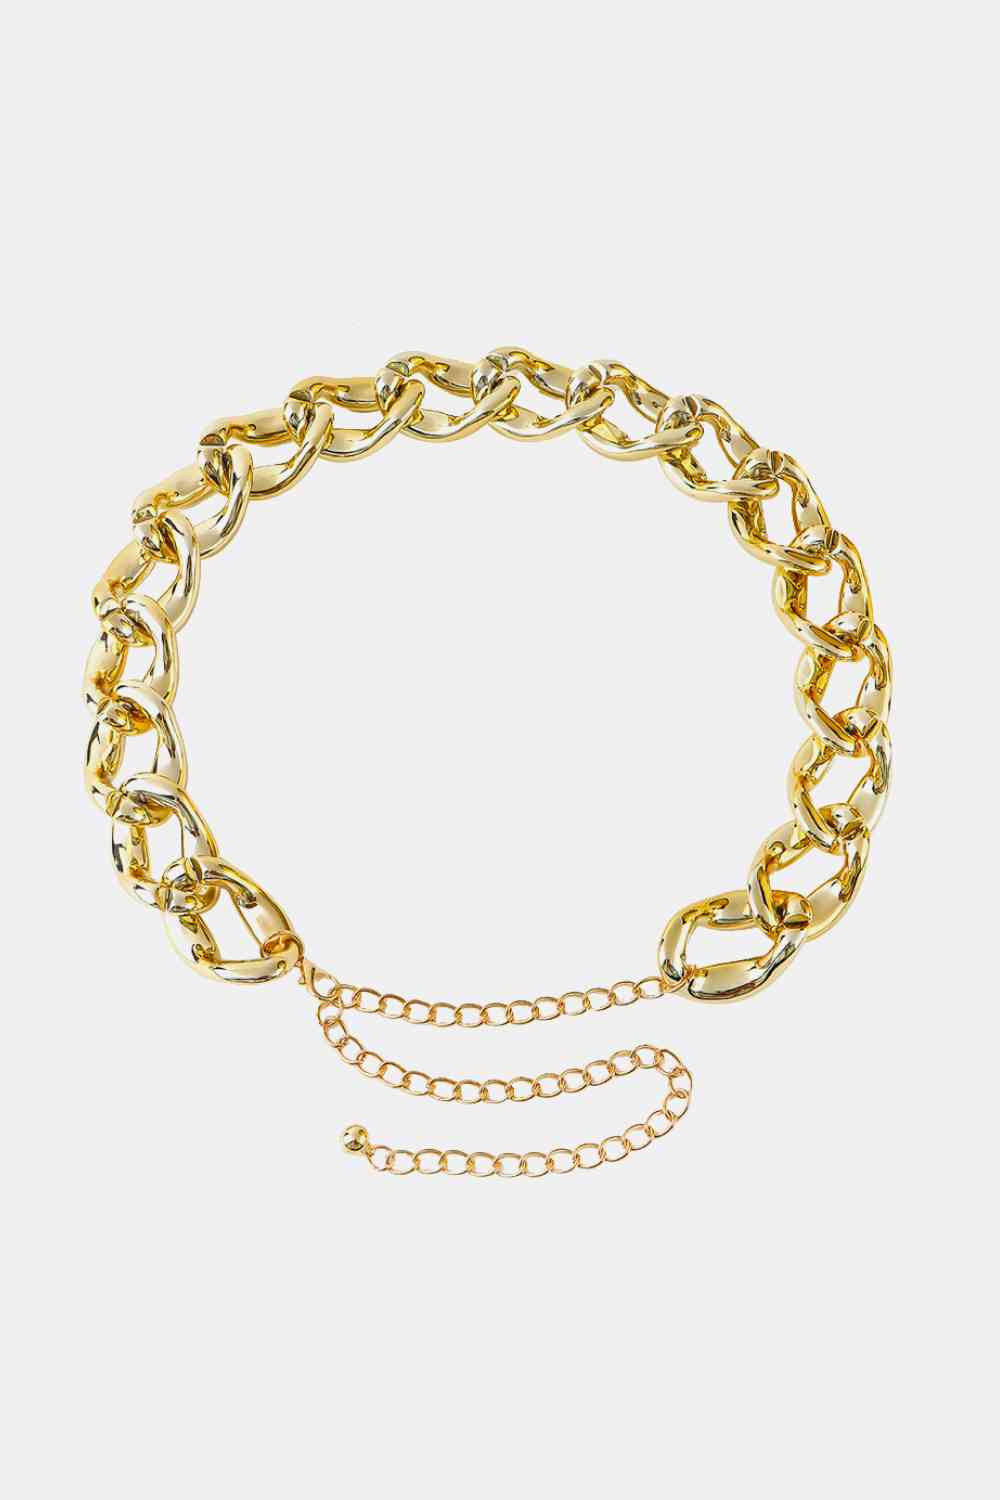 A shiny gold chain belt with large, interlocking links. It features an adjustable clasp with an extender chain and a small dangling charm at the end. This trendy fashion accessory, displayed on a plain white background, boasts bold acrylic links for a modern twist. The Acrylic Curb Chain Belt from Marianela's Exclusive Shop, LLC is perfect for adding a touch of elegance to any outfit.